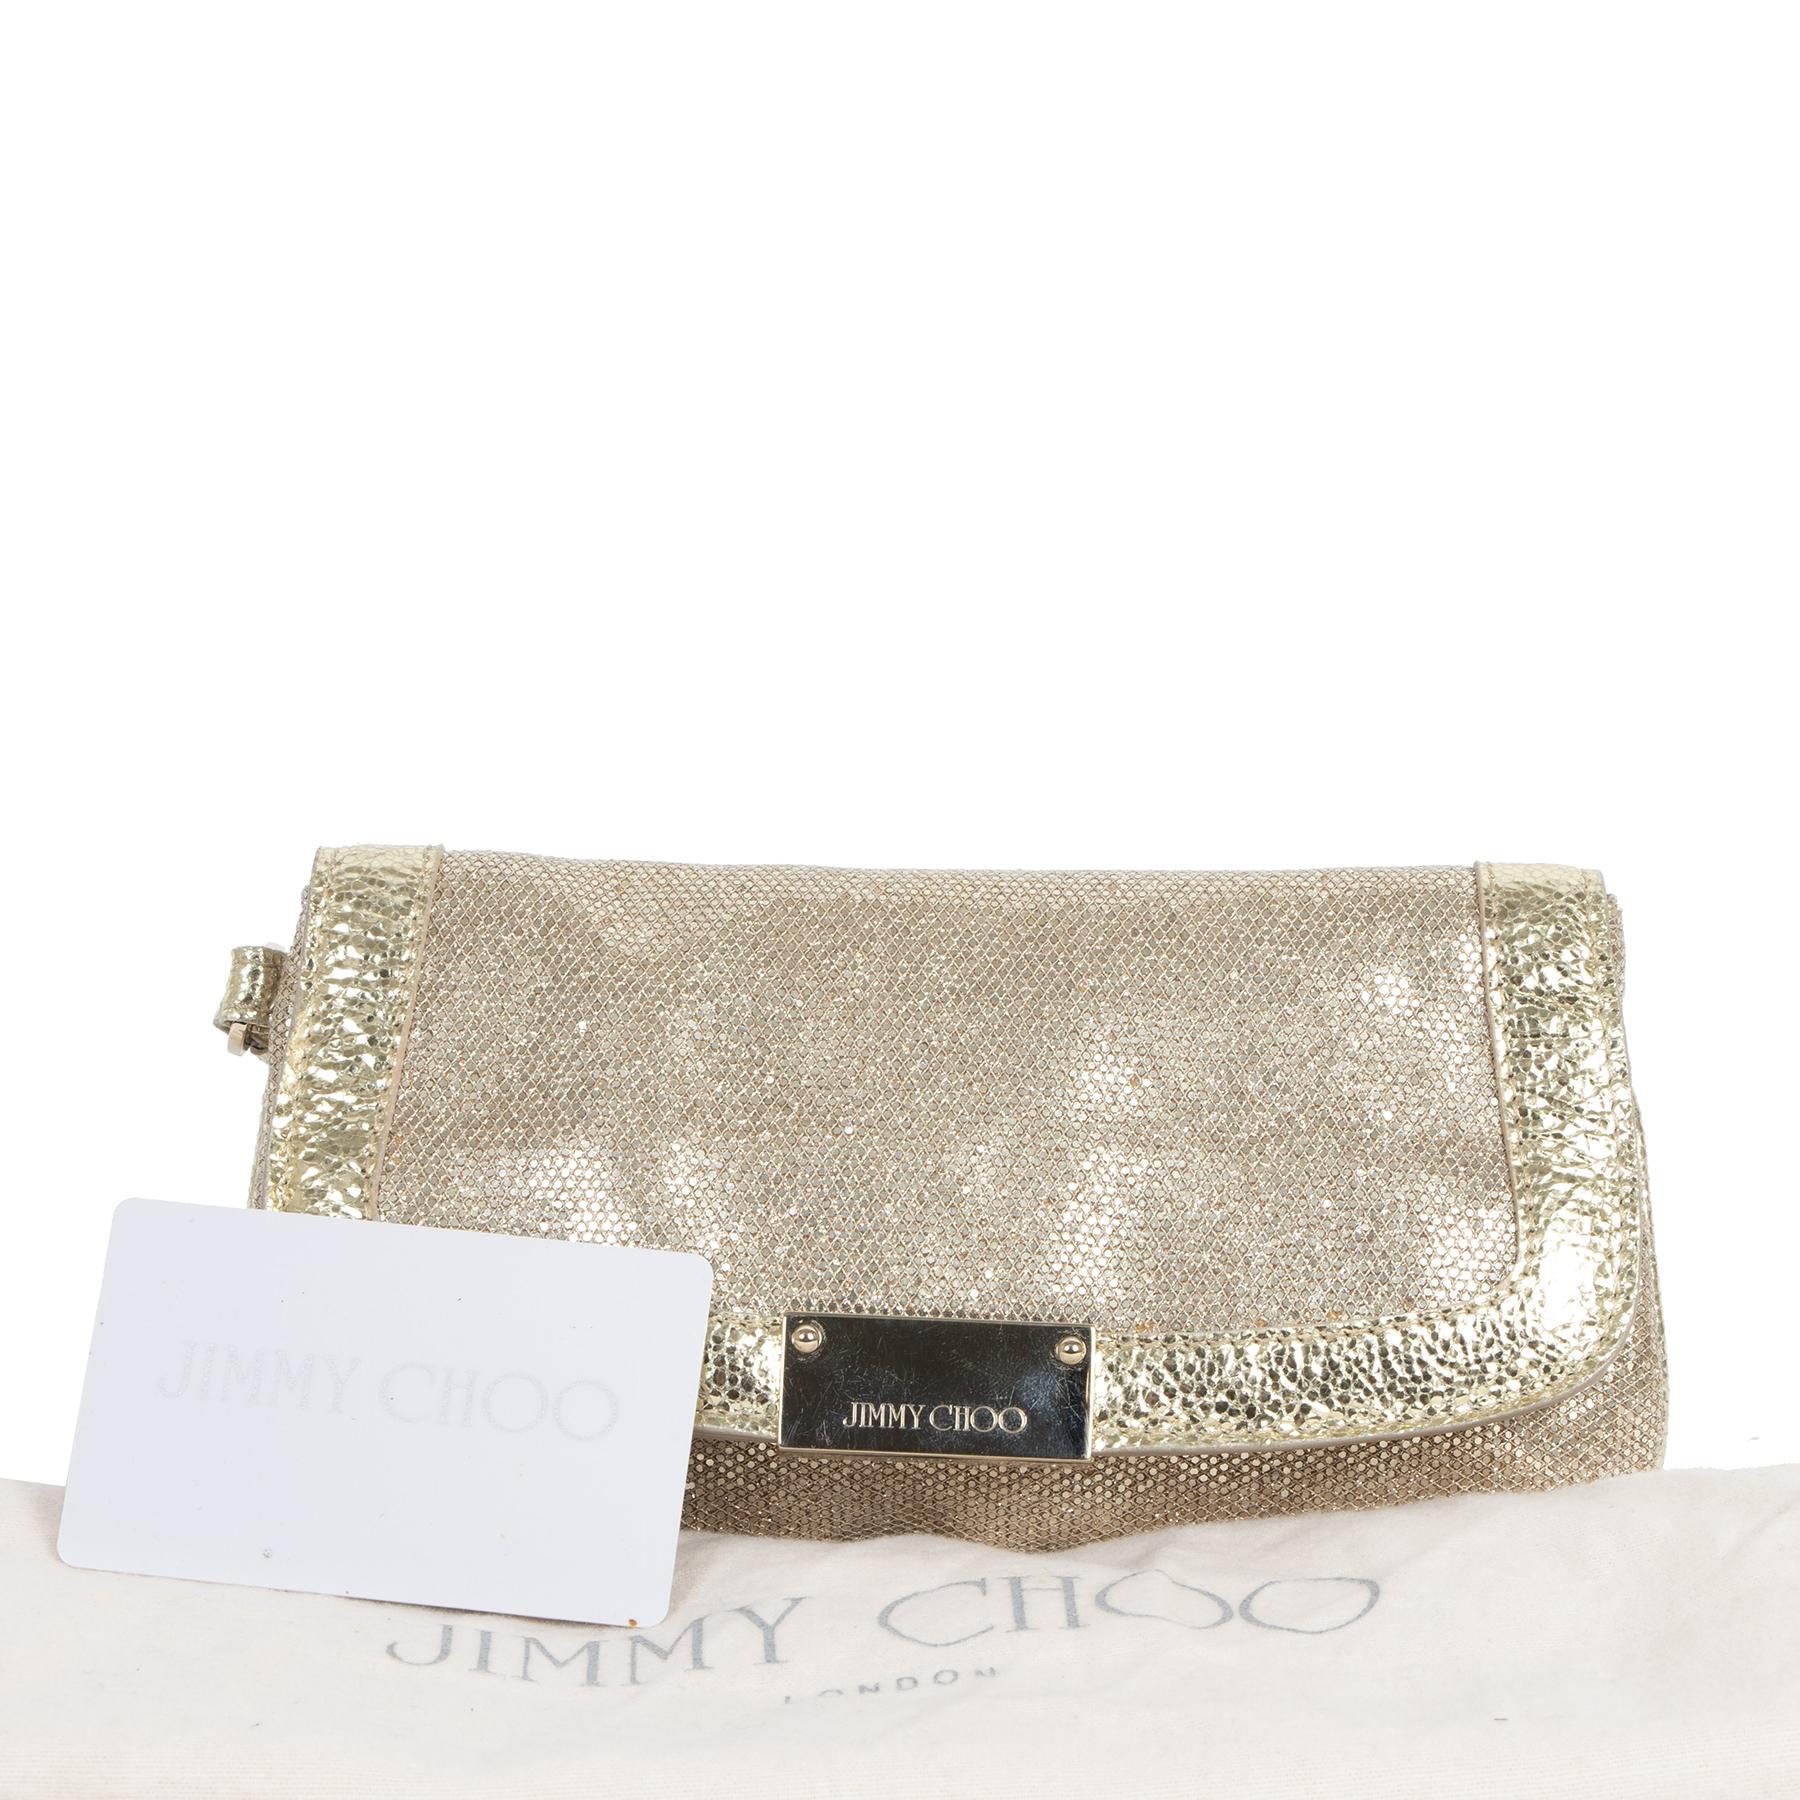 Very good condition

Jimmy Choo Zeta Gold Glitter Clutch

Turn every look into a festive ensemble with this gorgeous Jimmy Choo Zeta Clutch. This bag comes just in time for the most sparkly period of the year and is perfect for the holidays. It's